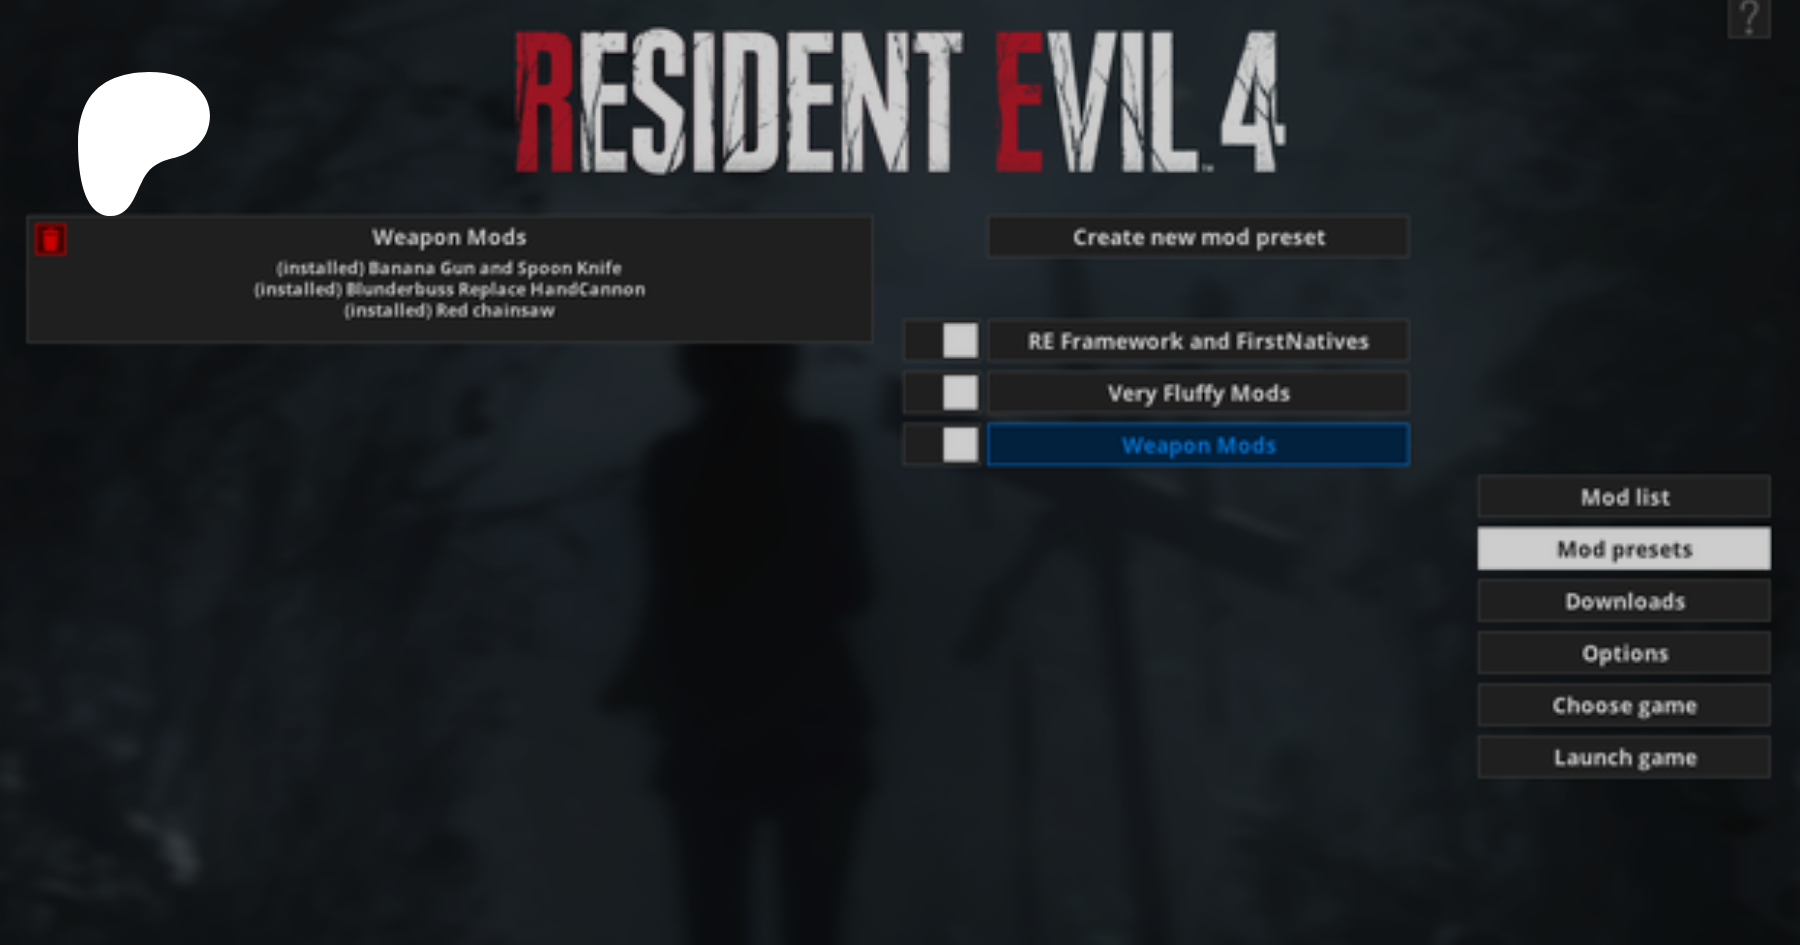 How to Install Mods for Resident Evil 3 (And More Games) - Fluffy Manager  Guide 